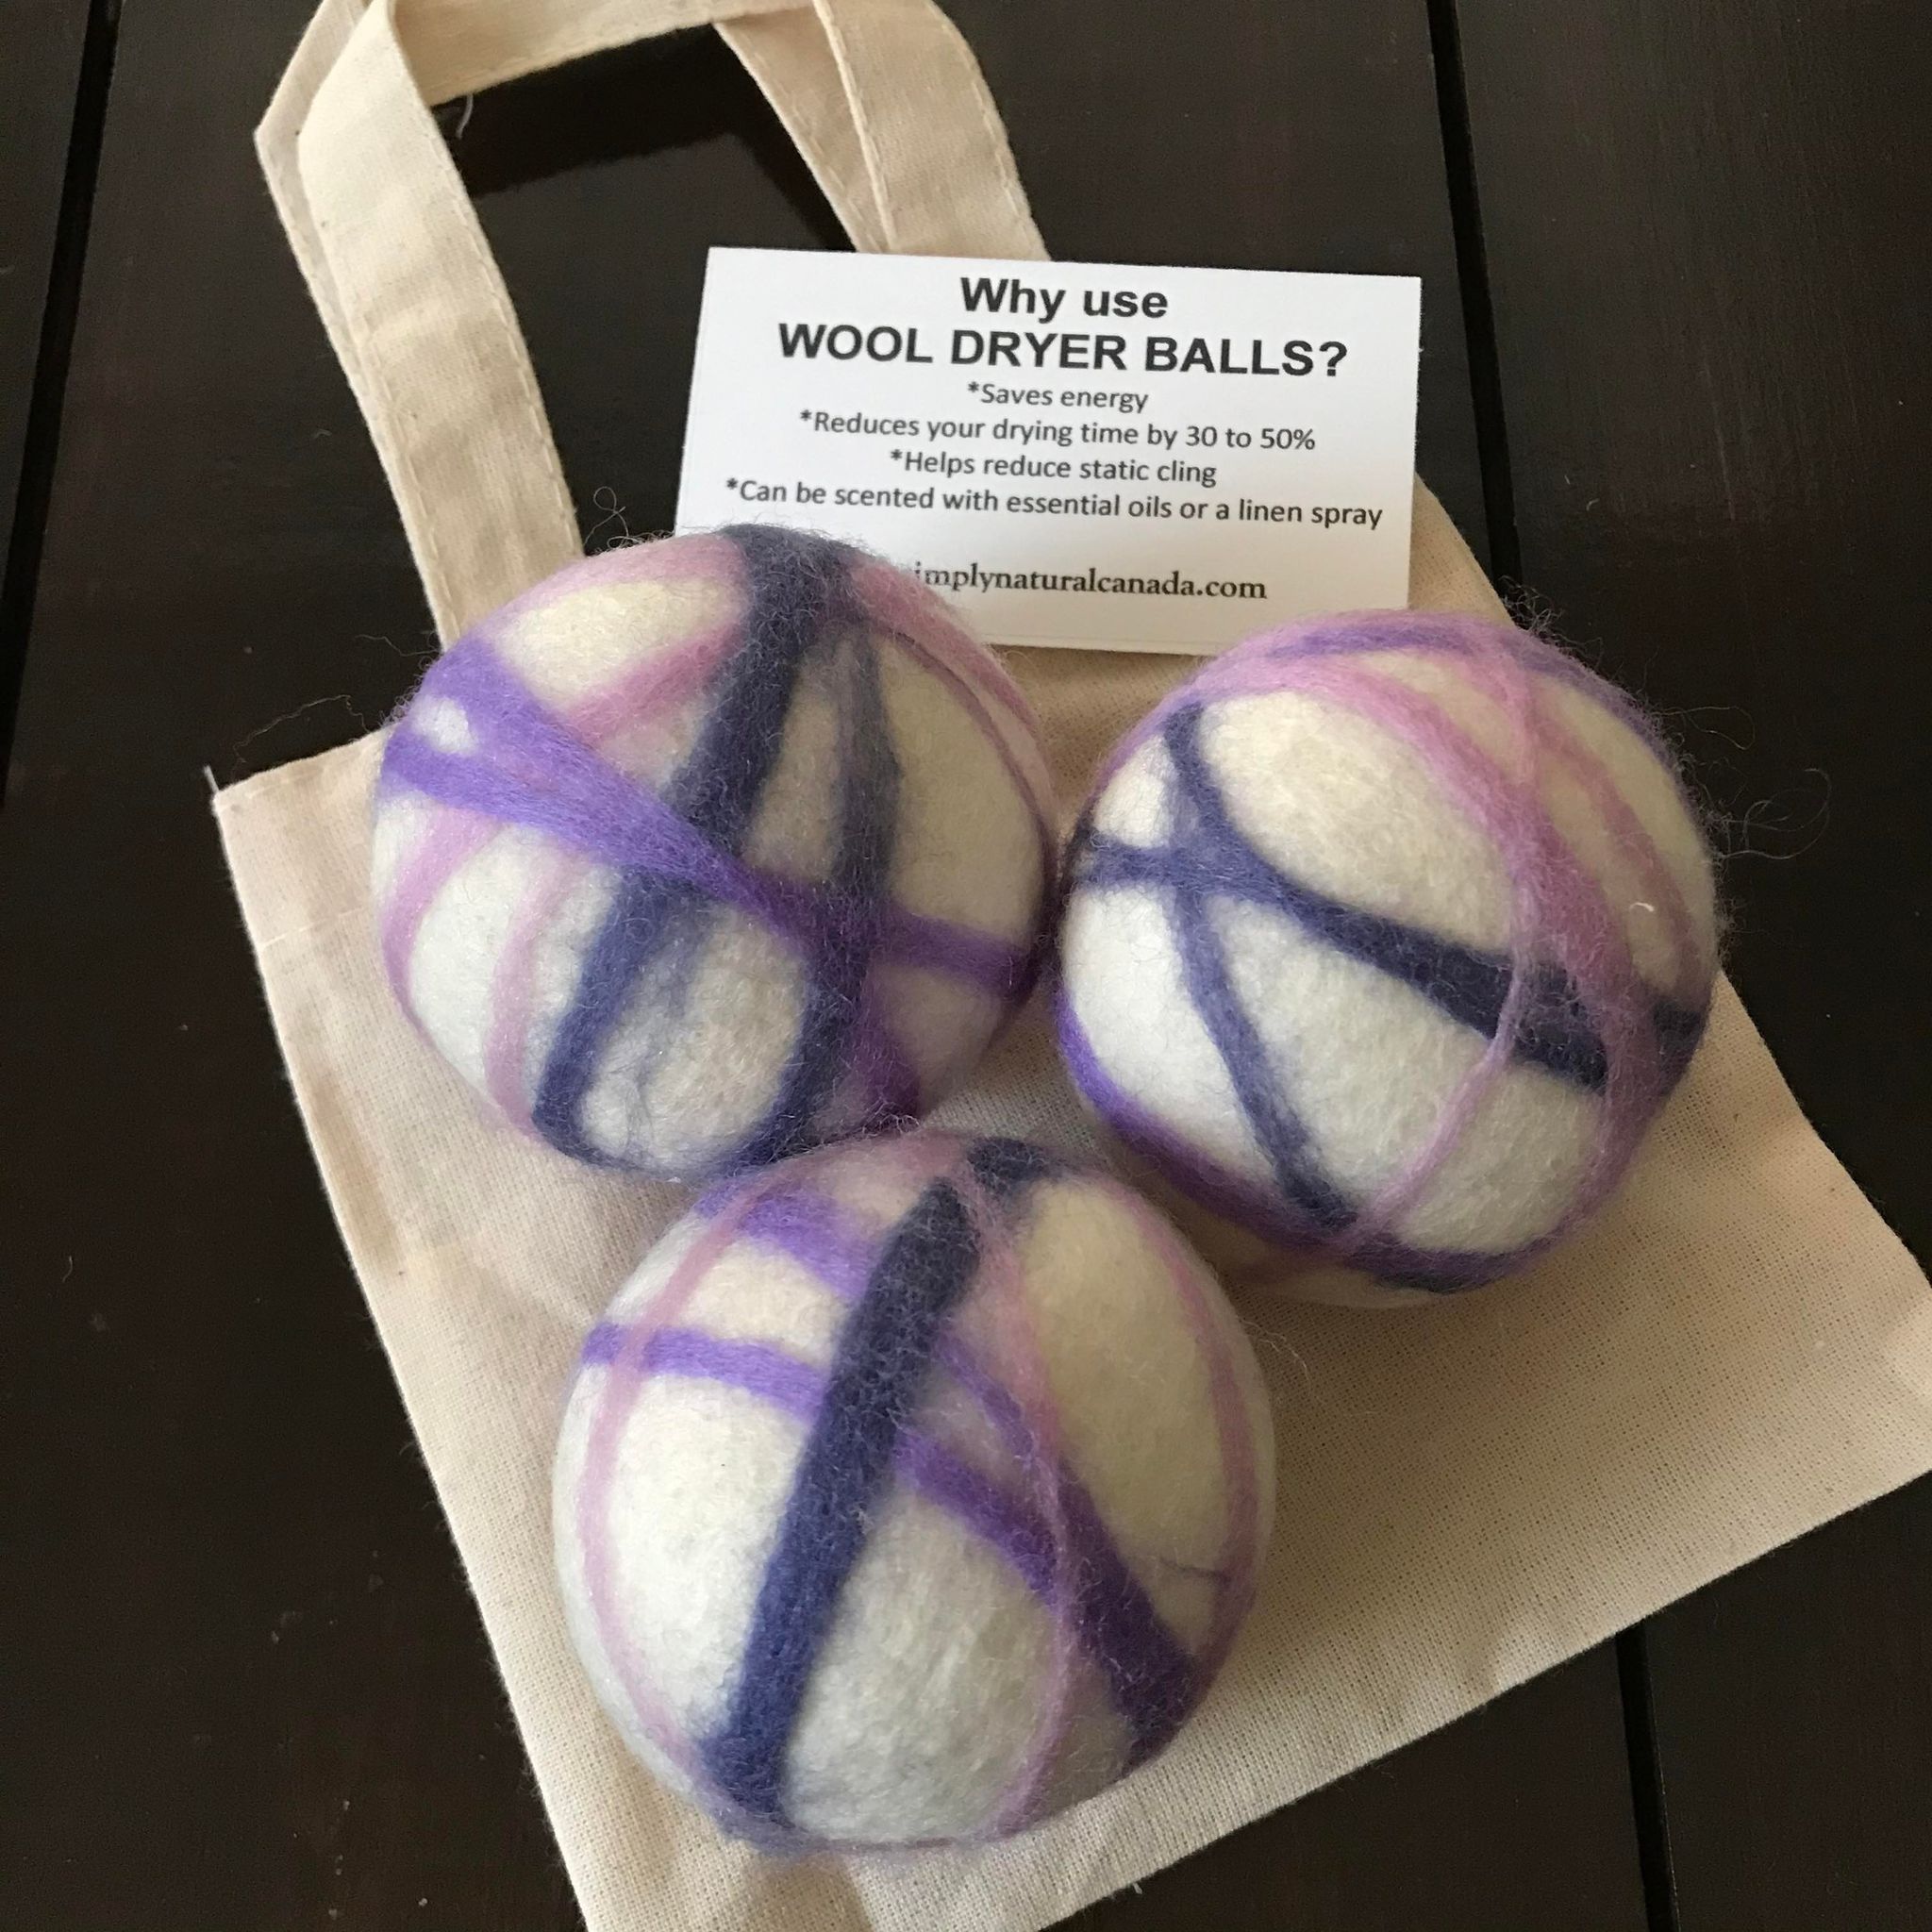 set of 3 canadian made white, purple and pink 100 percent wool dryer balls sold in a cloth bag